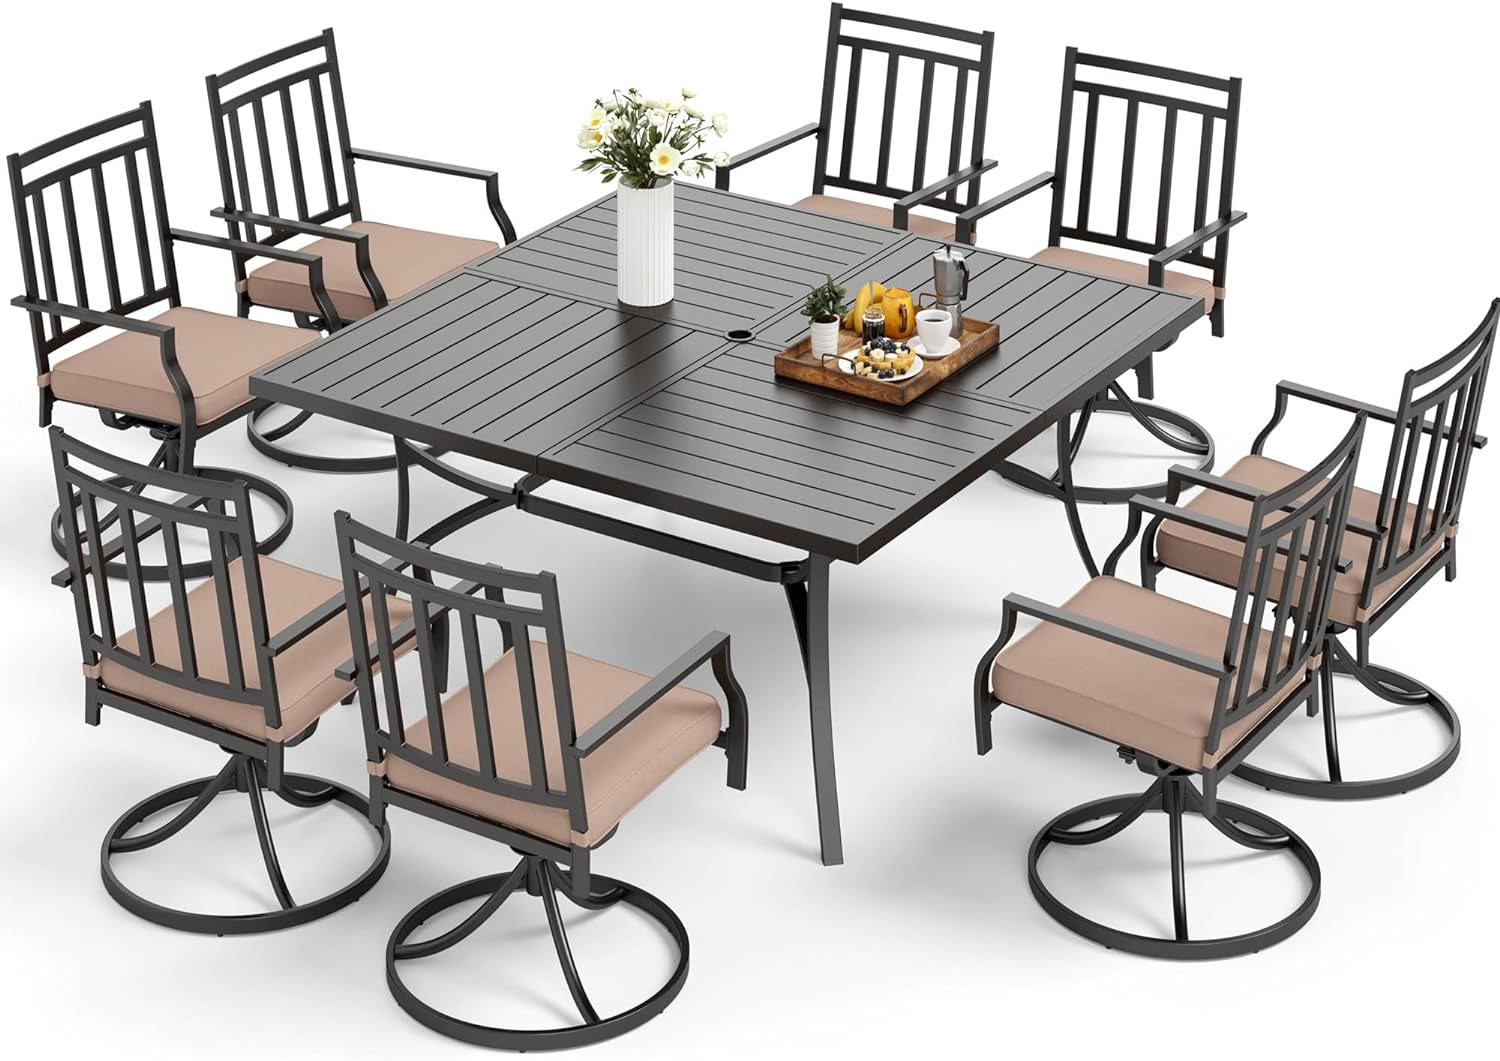 MFSTUDIO Patio Dining Set of 9 with Large Square Metal Slat Dining Table and 8 Swivel Metal Chair with Cushion, All Weather Outdoor Furniture, Black